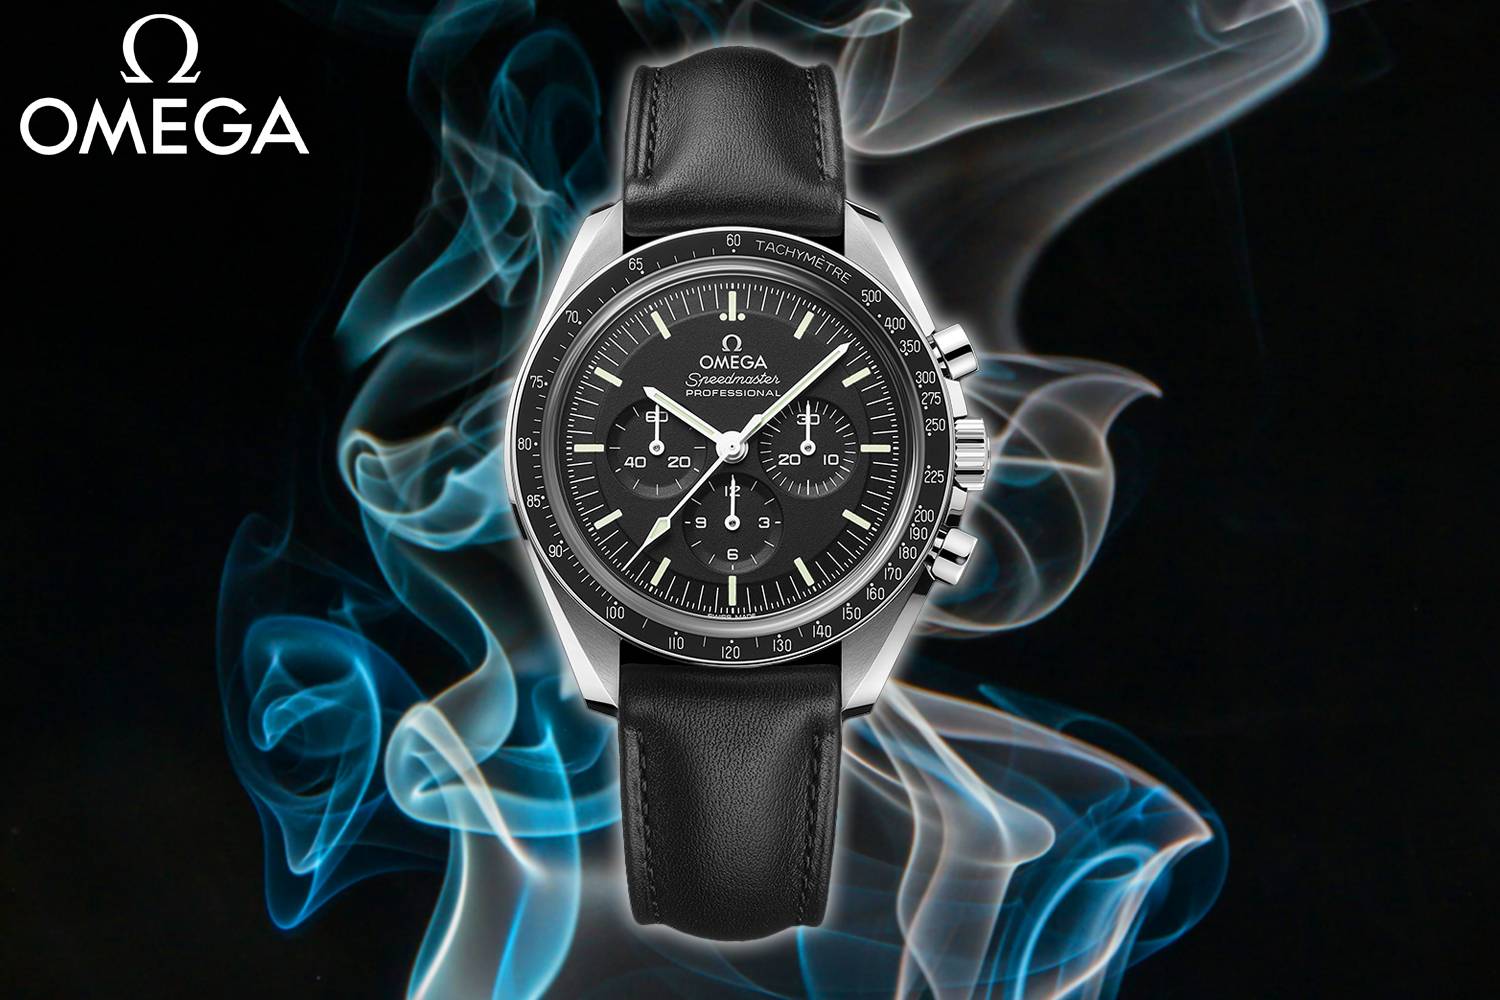 Win this Omega Speedmaster Moonwatch or £5,000 Tax Free